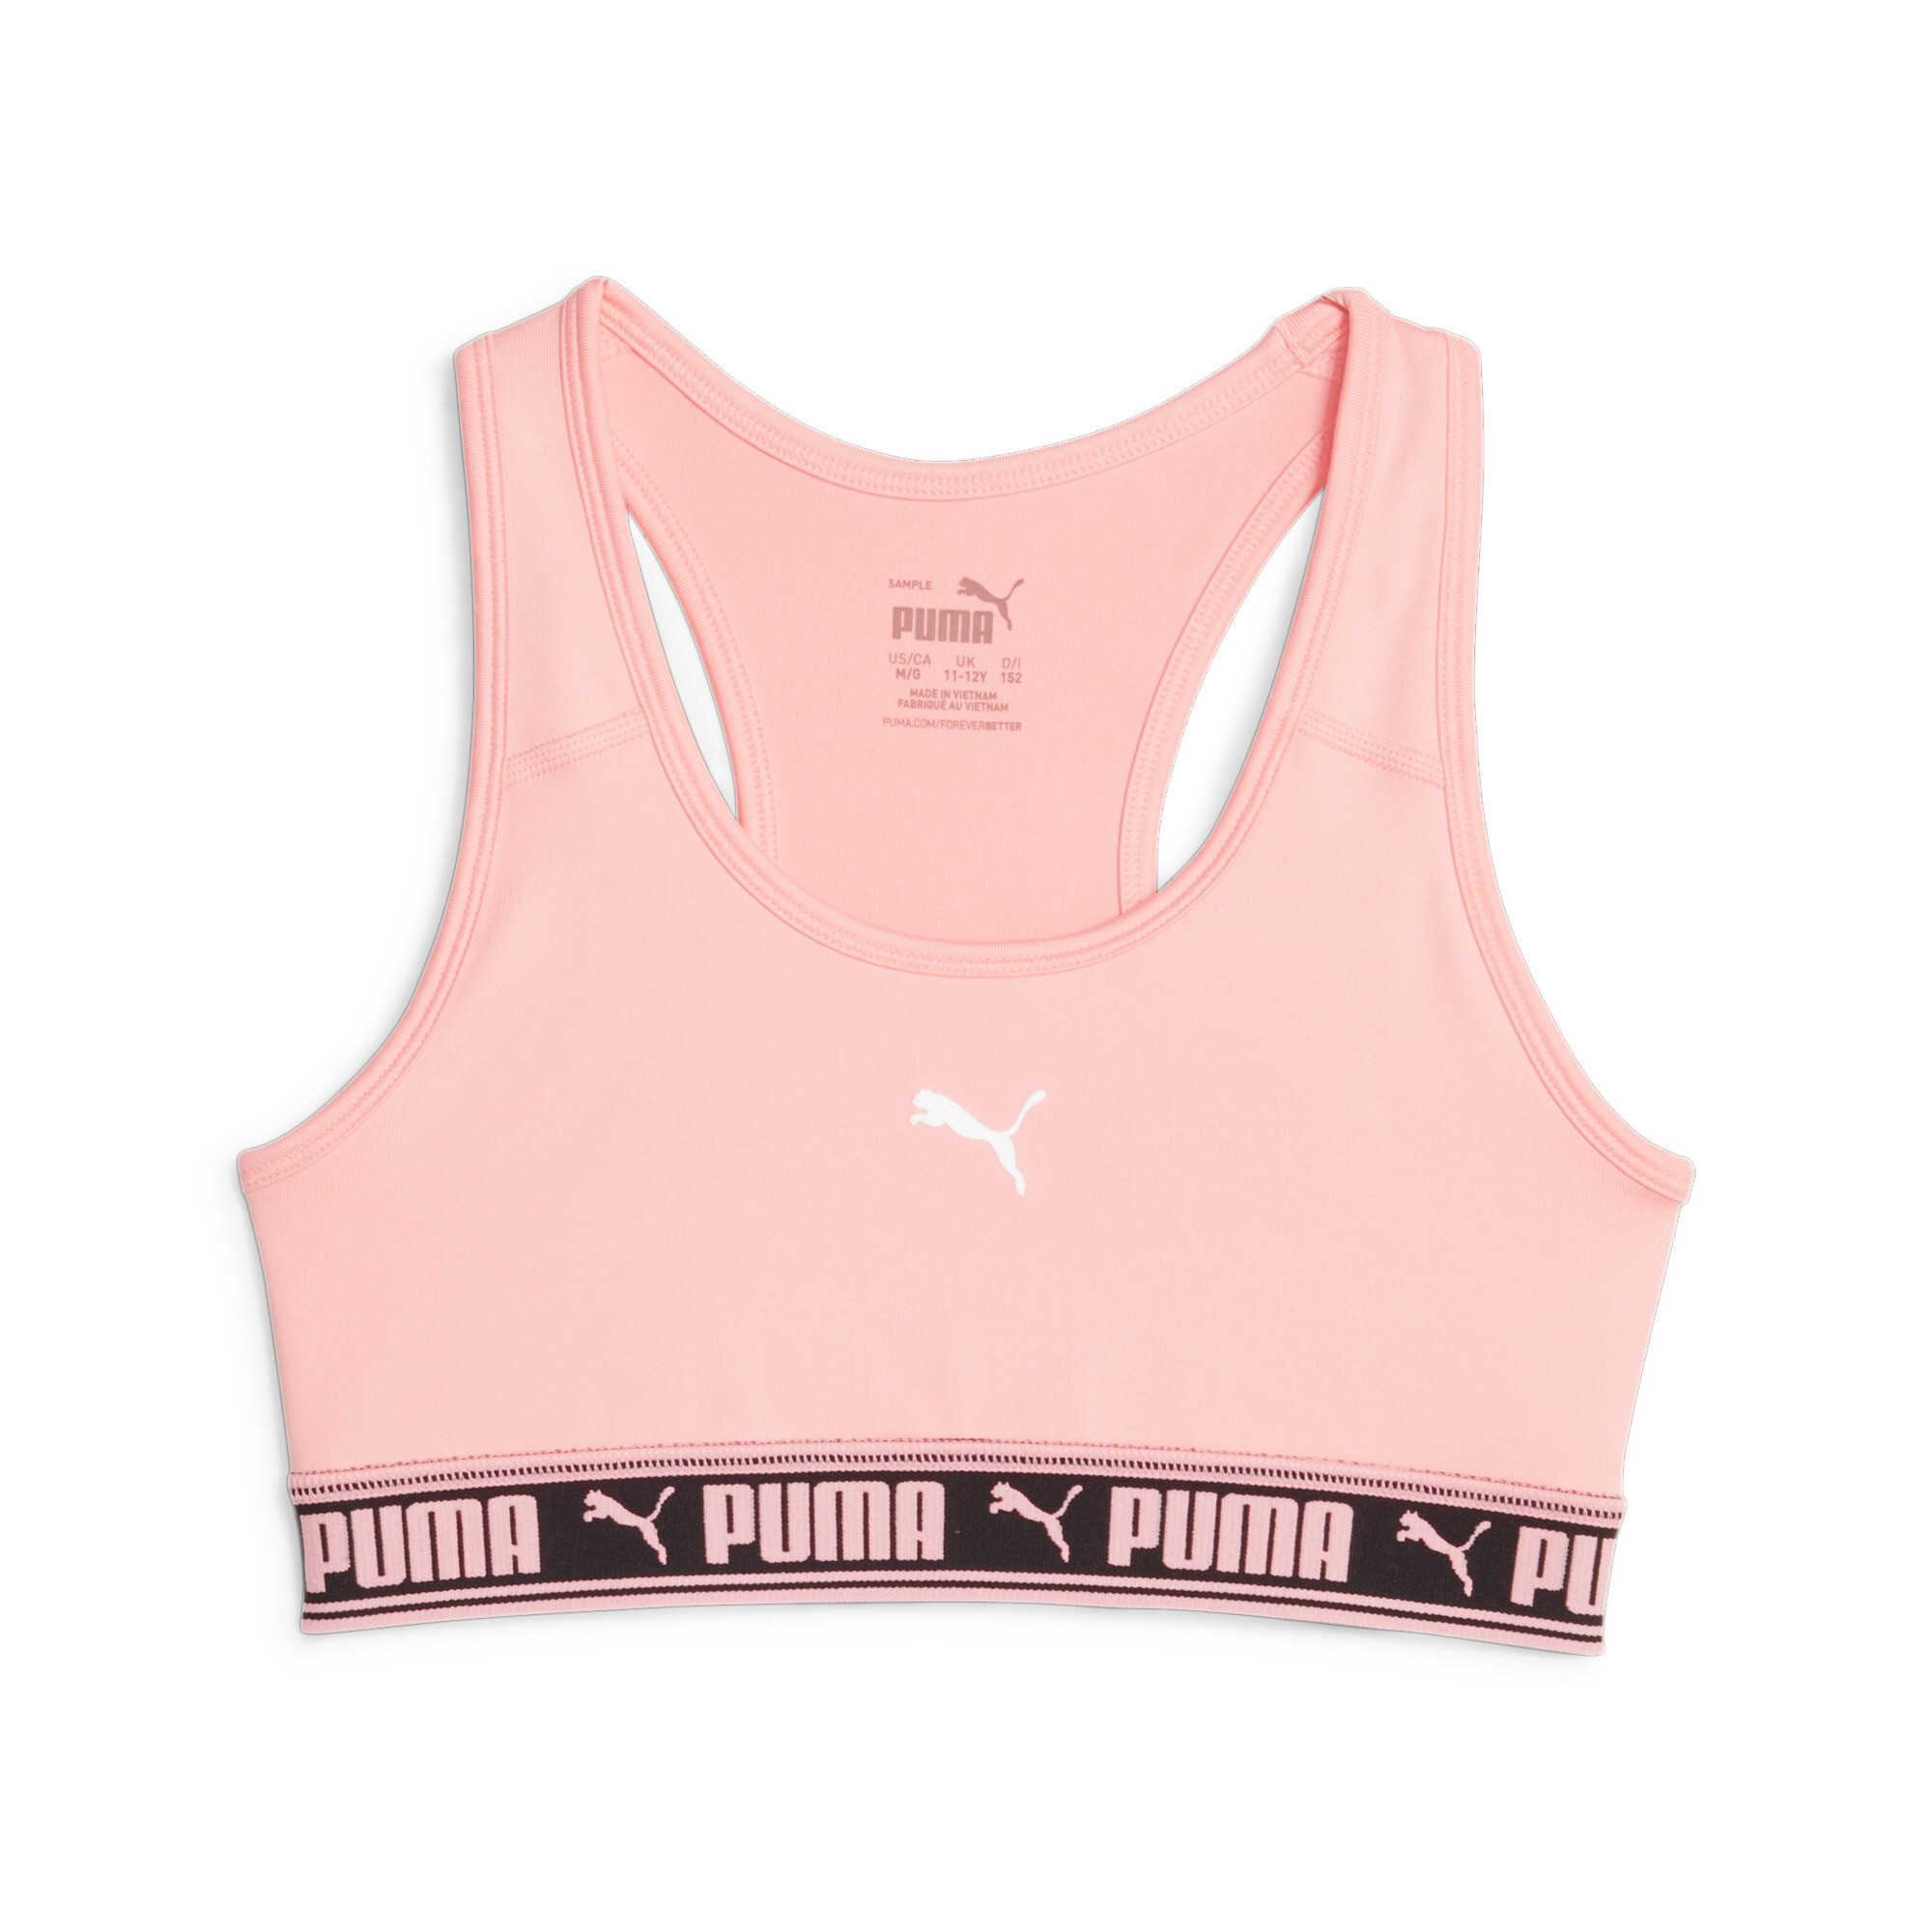 Women's Puma Strong Bra Youth, Pink, Size 7-8Y, Clothing